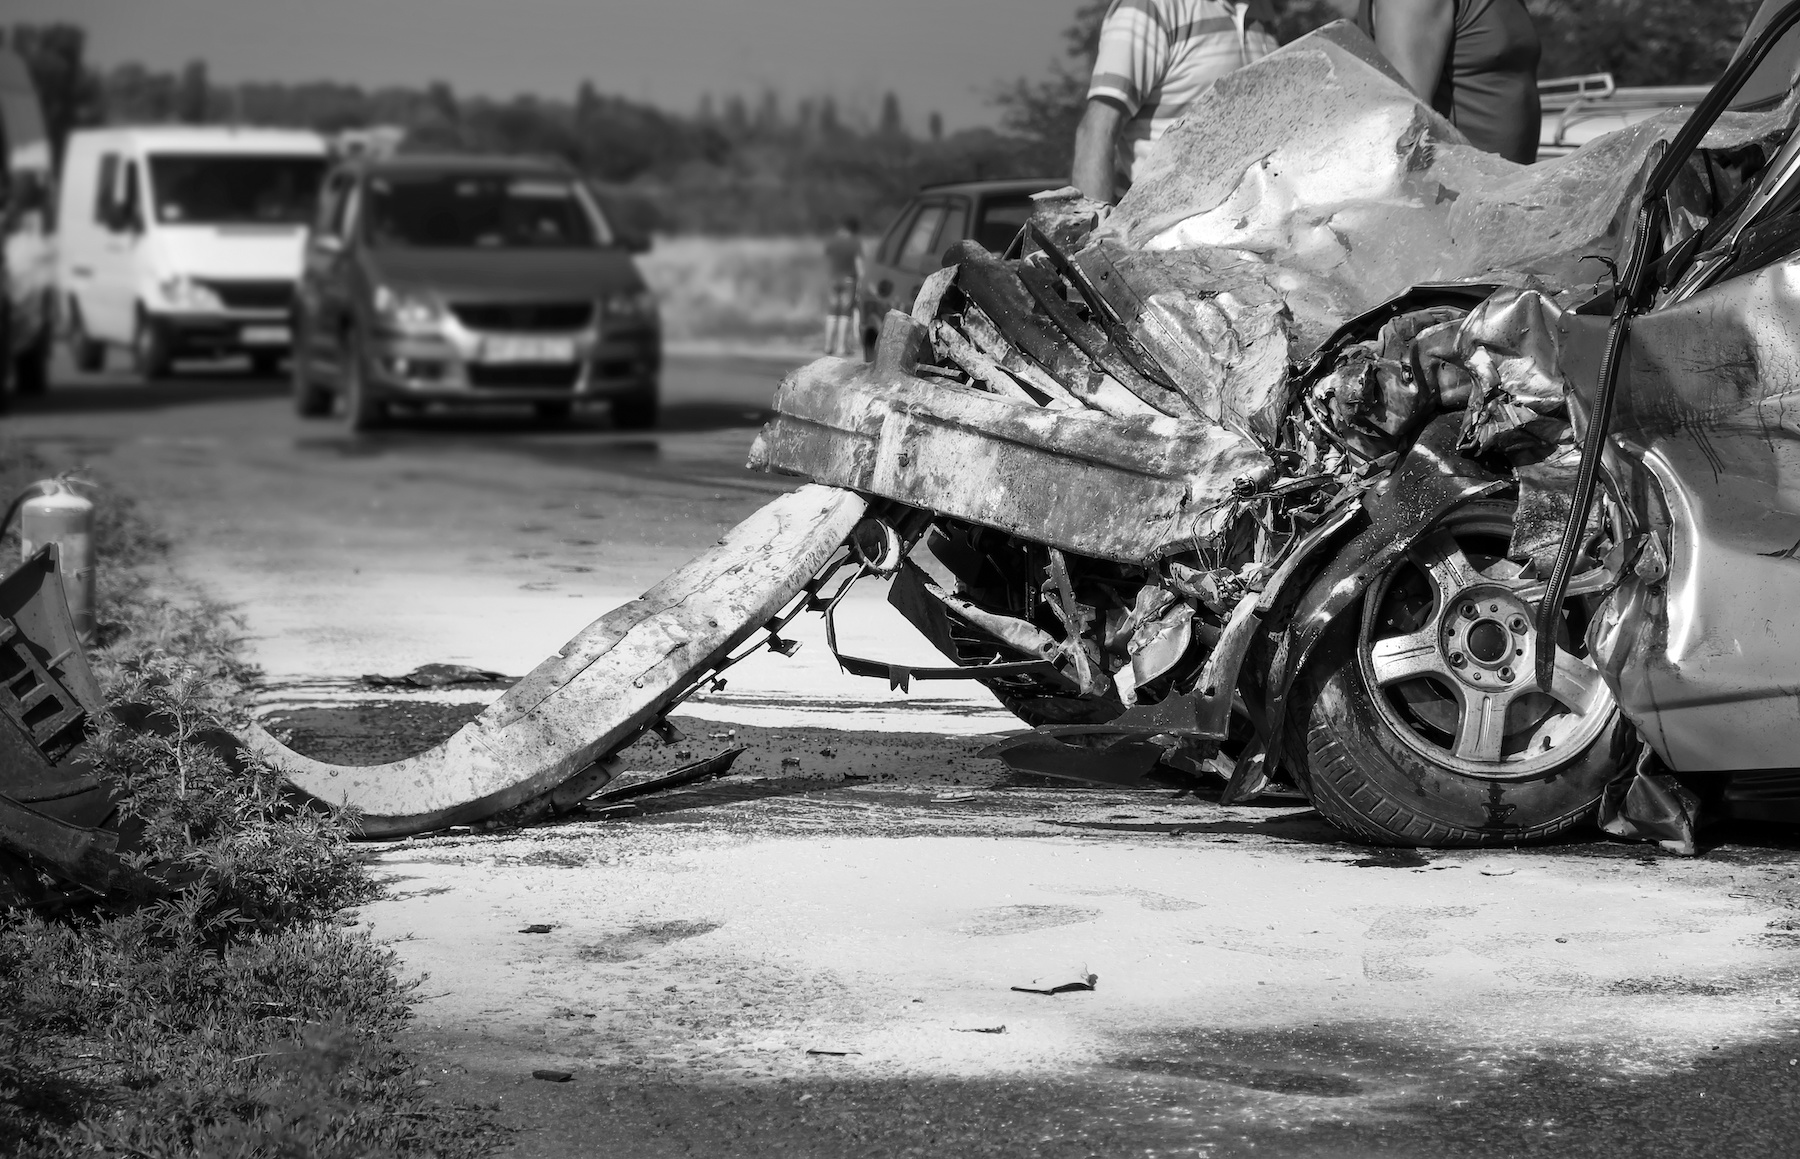 Black and white photo of a severe car crash scene with a heavily damaged vehicle in the foreground and other cars stopped in the background. This image, perfect for a blog archive on personal injury, starkly captures the aftermath of the collision. Lancaster, CA Car Accident Attorneys